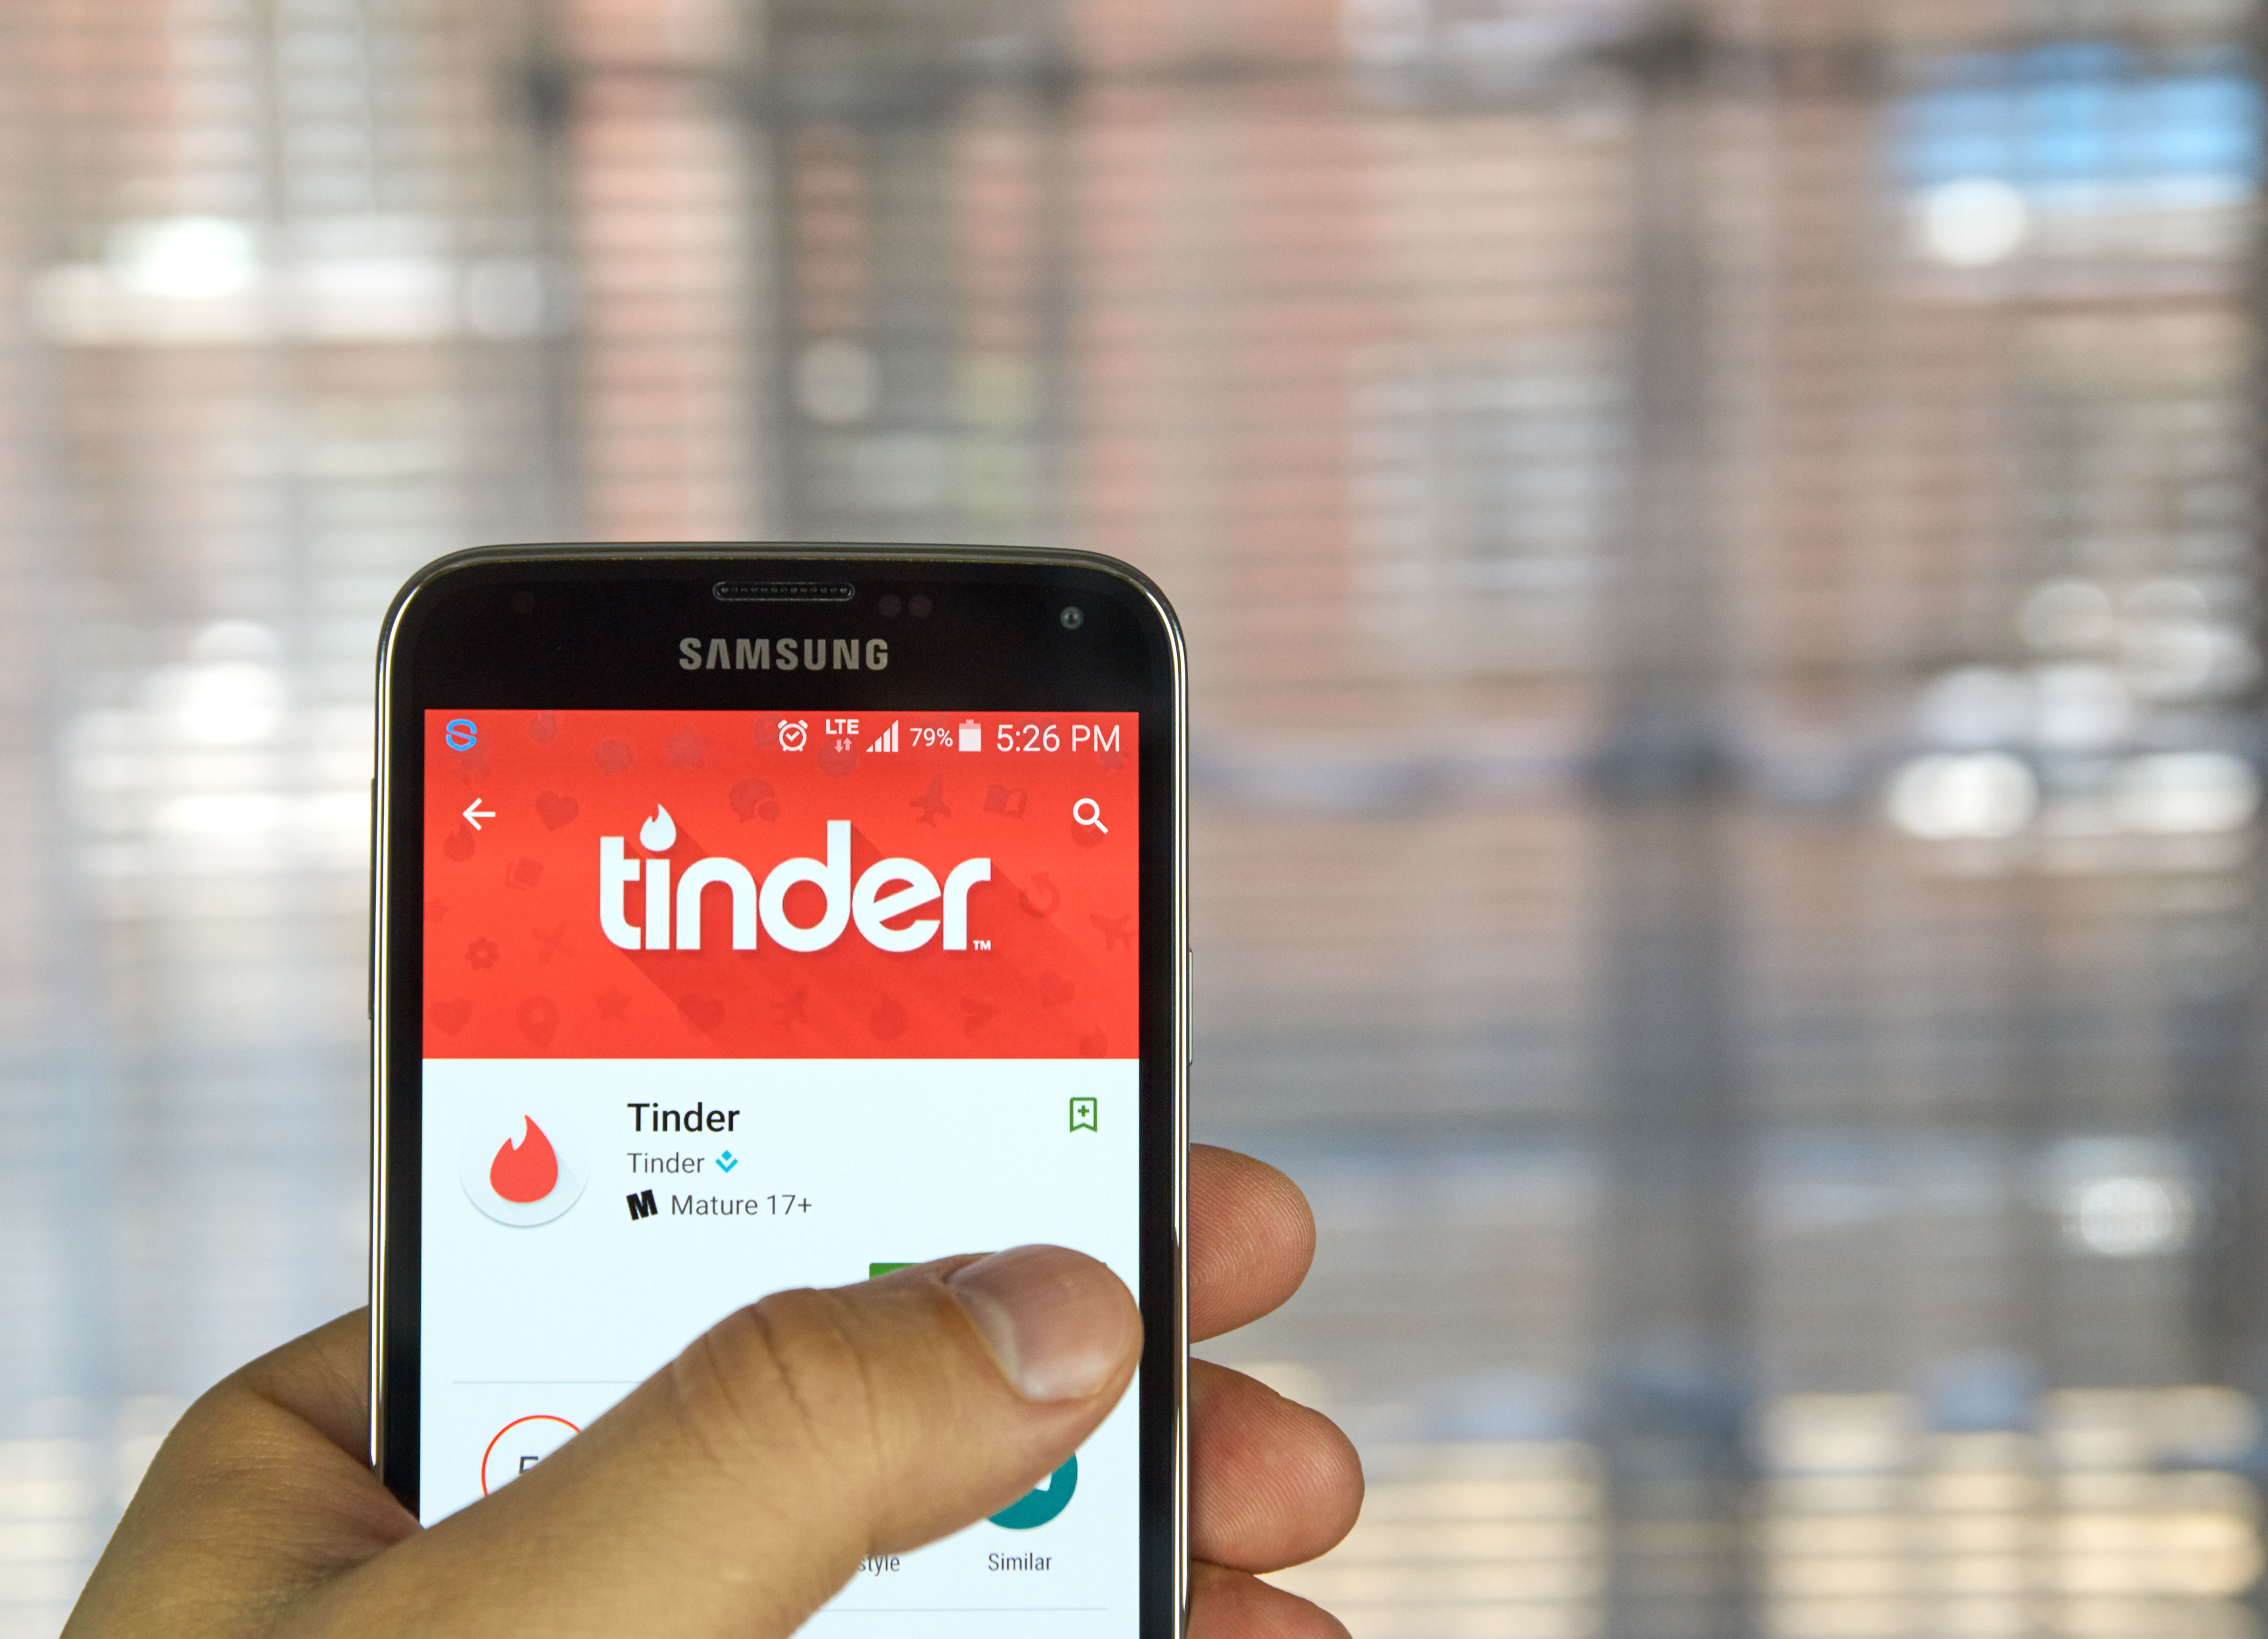 Tinder Me Tender: Breaking the Myth of a Mobile Dating Application in a Cross-Cultural Comparison